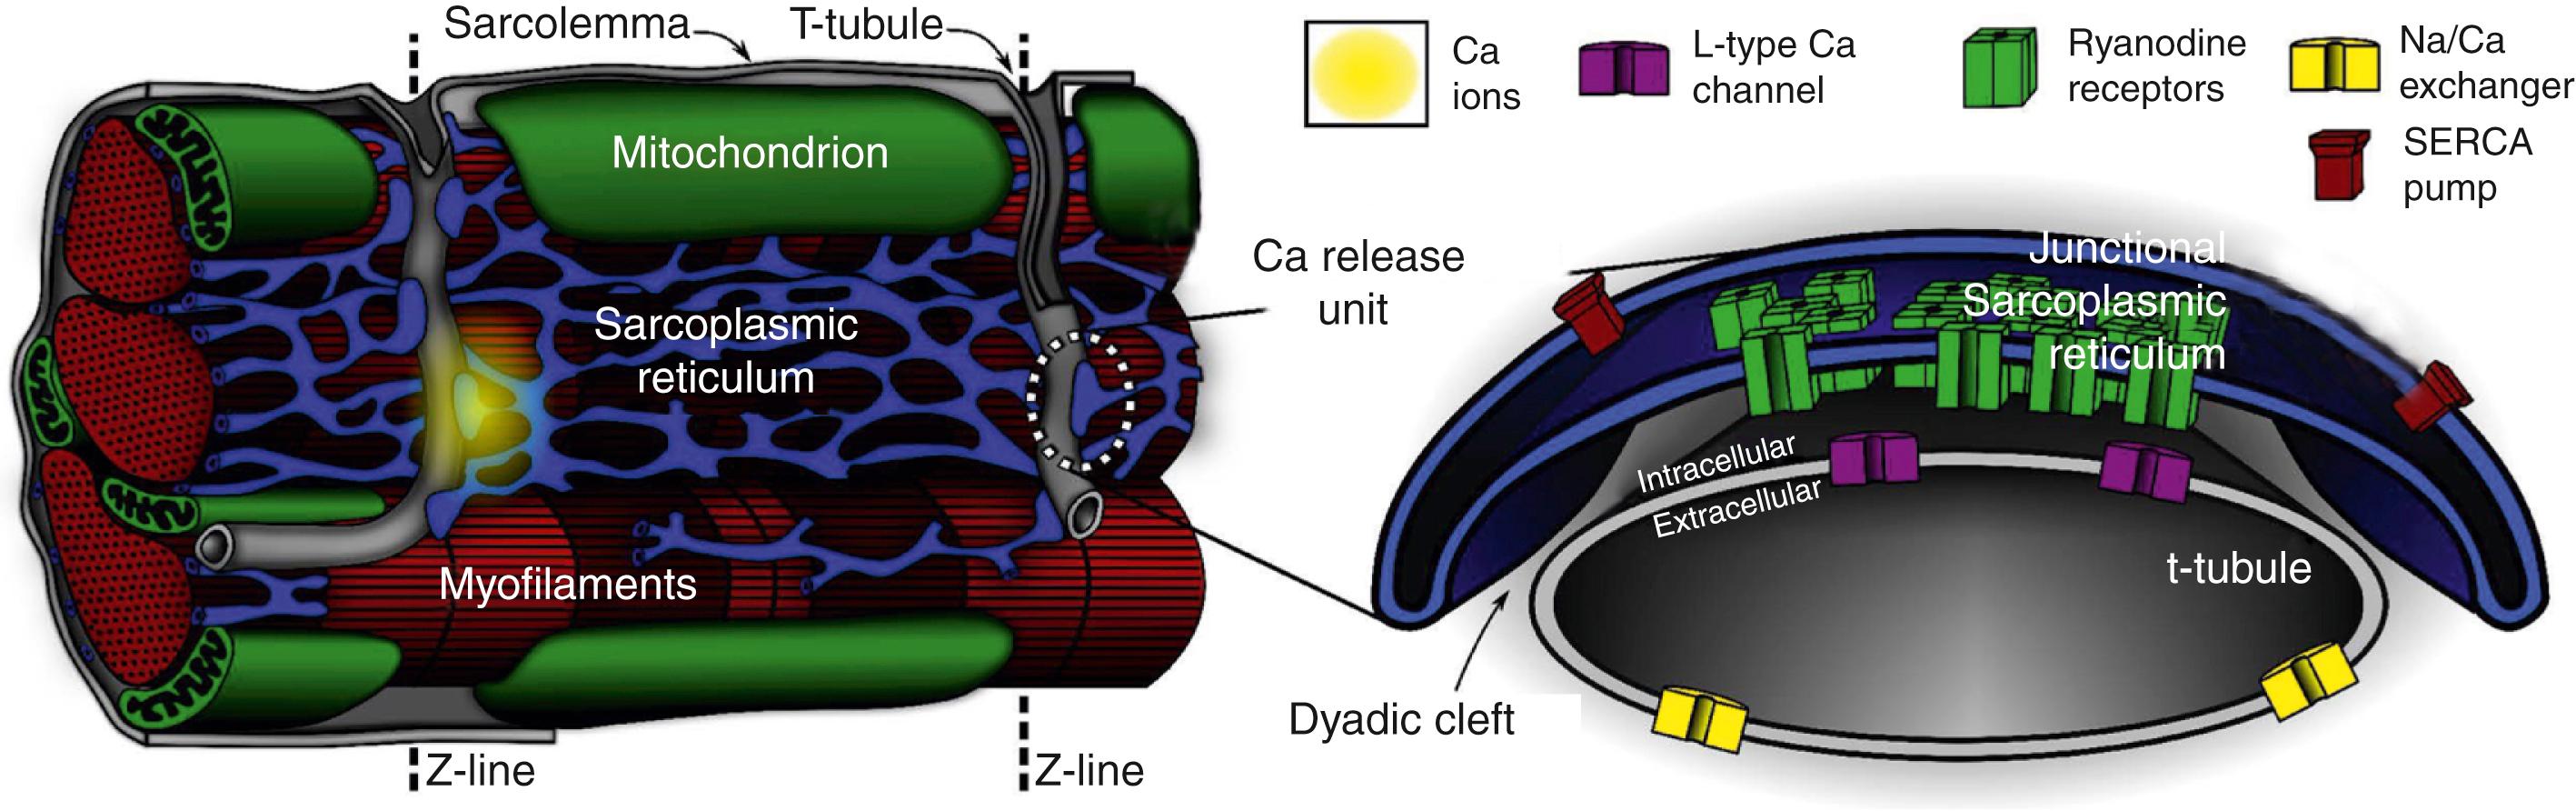 Fig. 32.1, Overview of structures involved in cardiac Ca 2+ handling and excitation-contraction coupling.